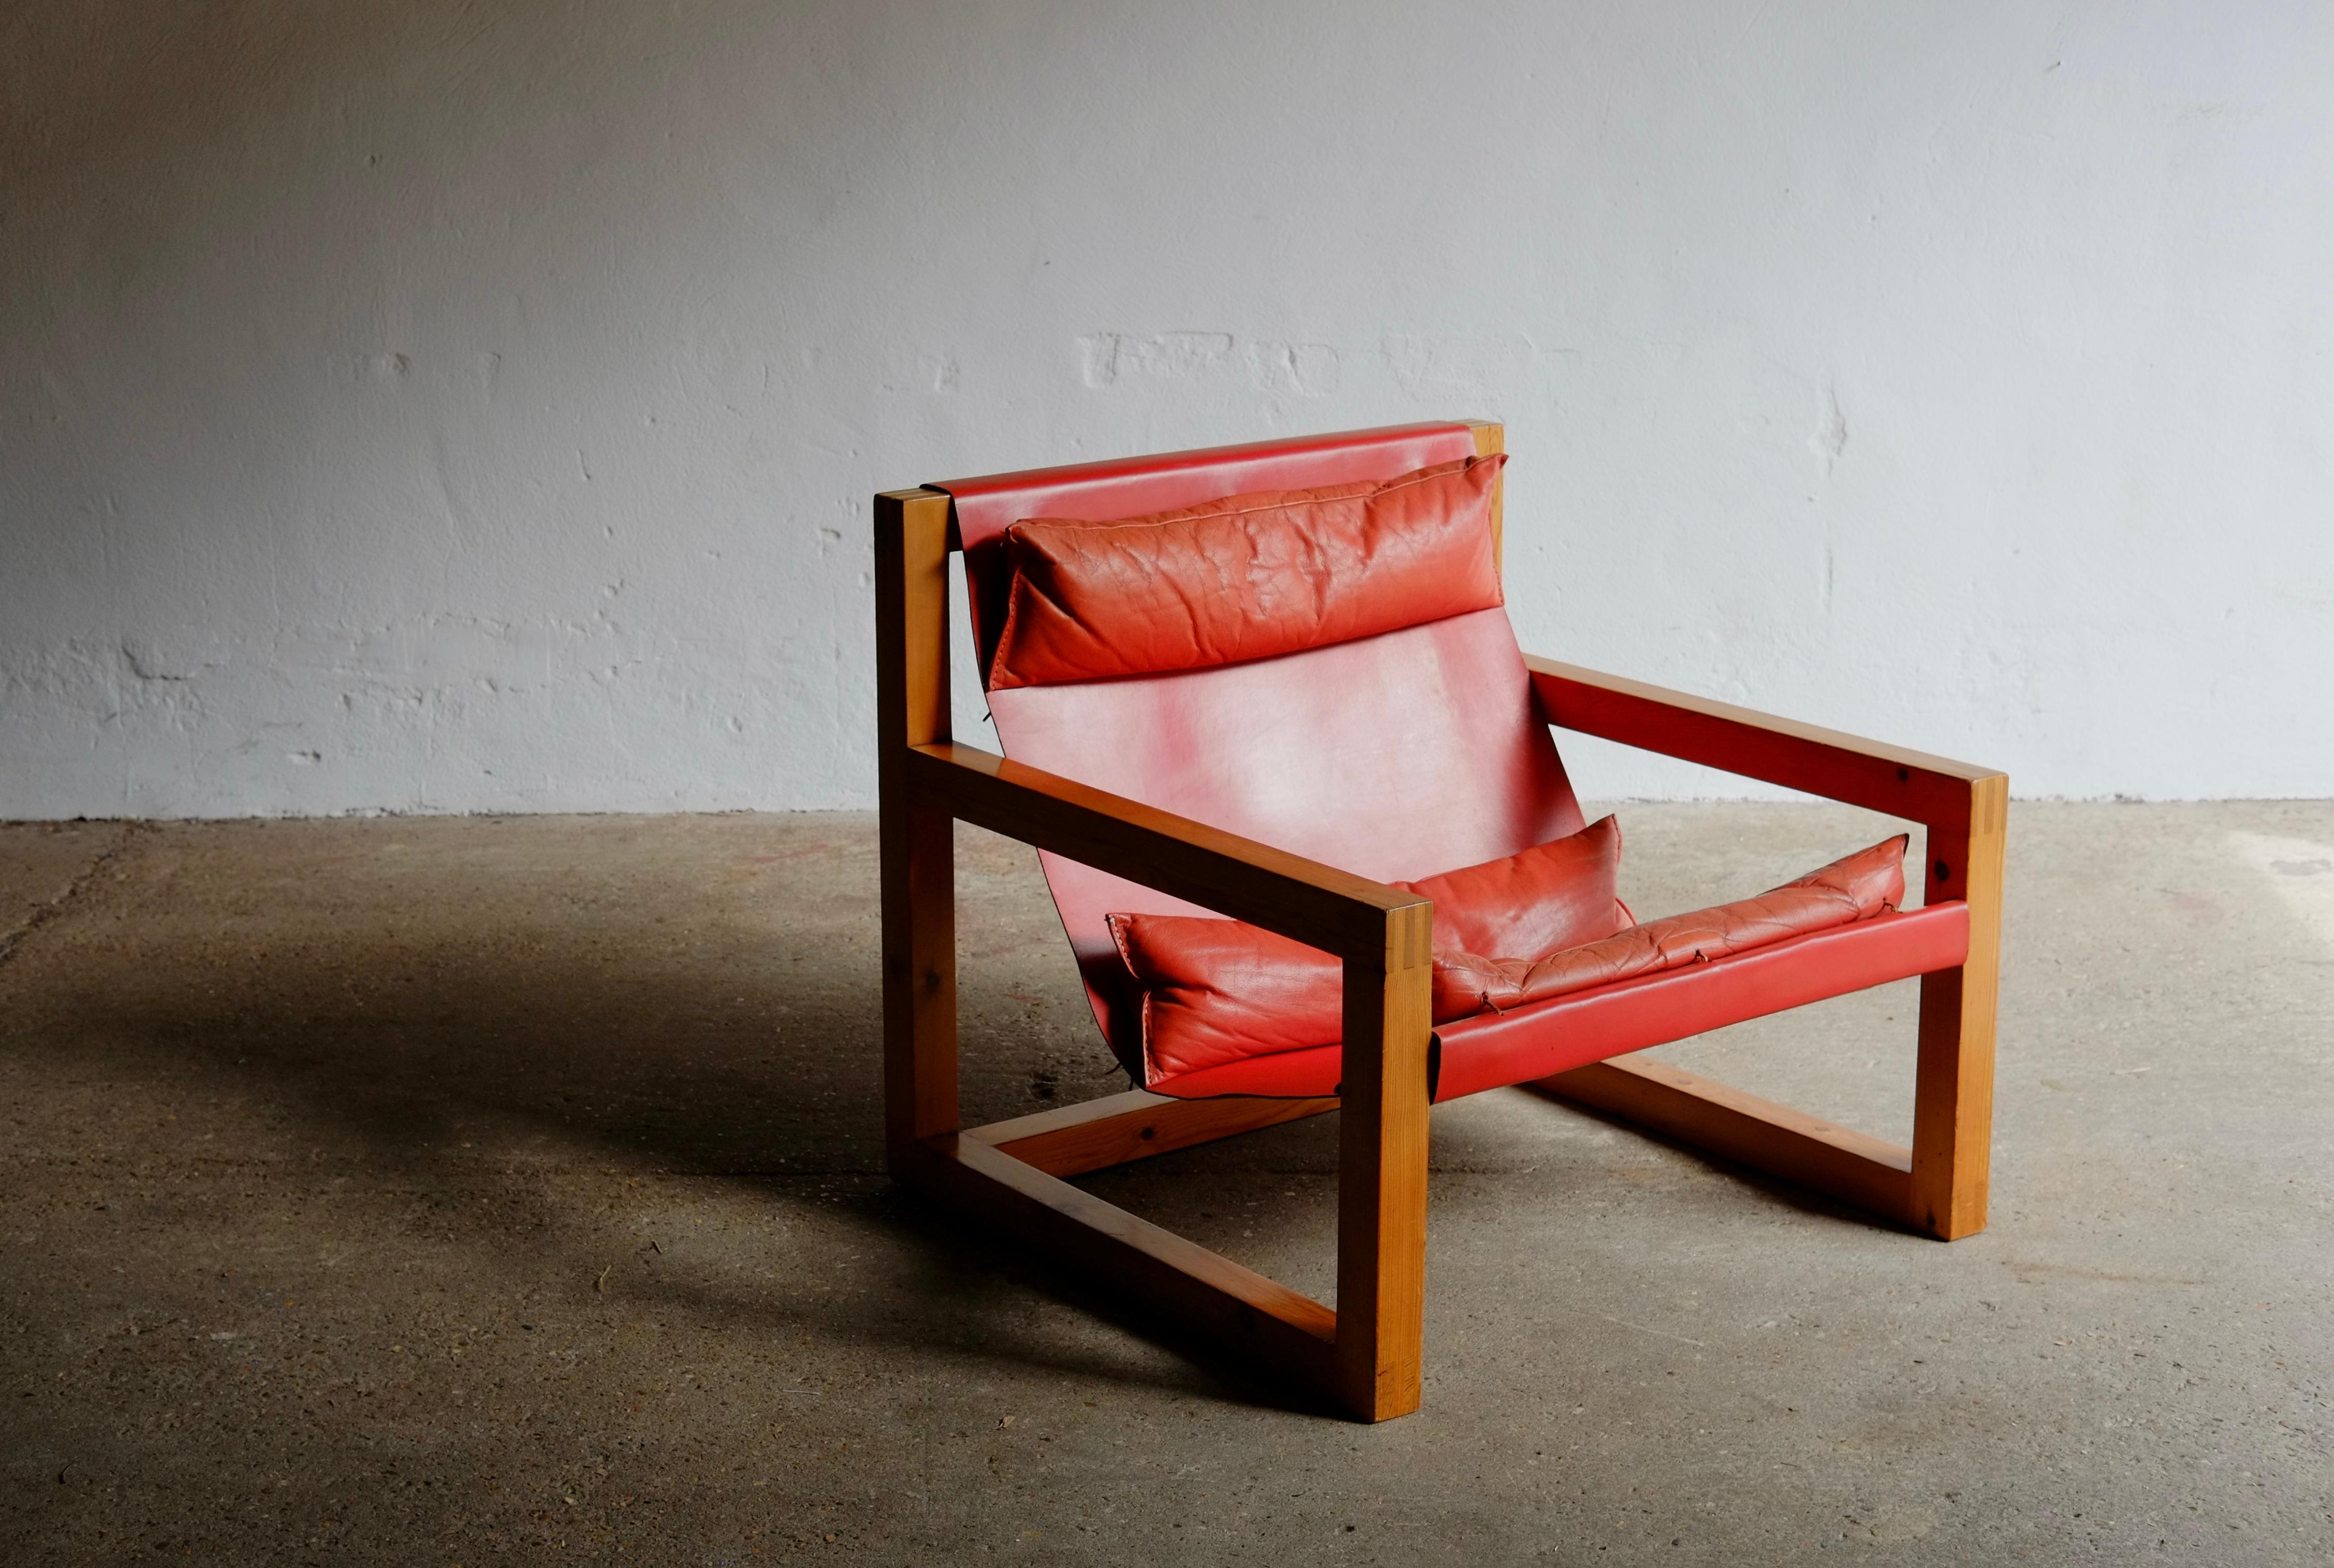 A rare red leather sling lounge chair designed by British designer John Makepeace (OBE) and produced in the 1970's by Liberty & Co.

Pine frame with a red leather seat and three matching supporting cushions. The chair is in good solid vintage